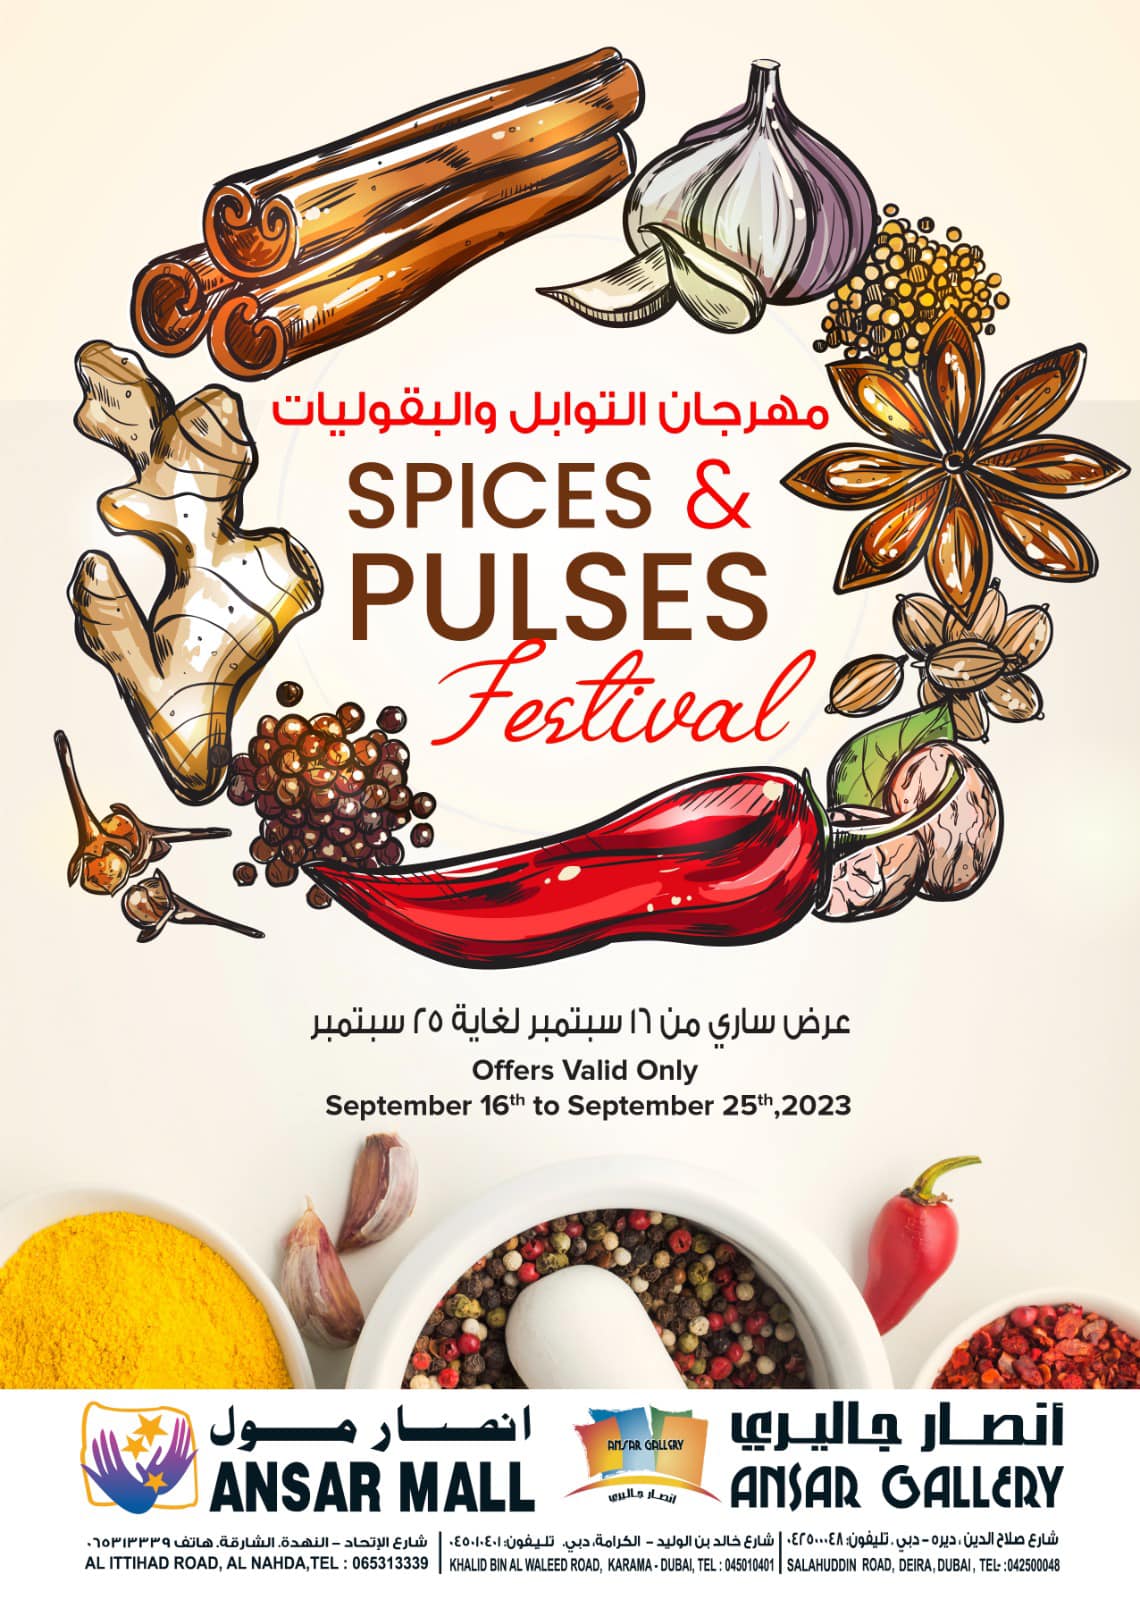 ANSAR GALLERY OFERS SPICES & PULSES FESTIVAL